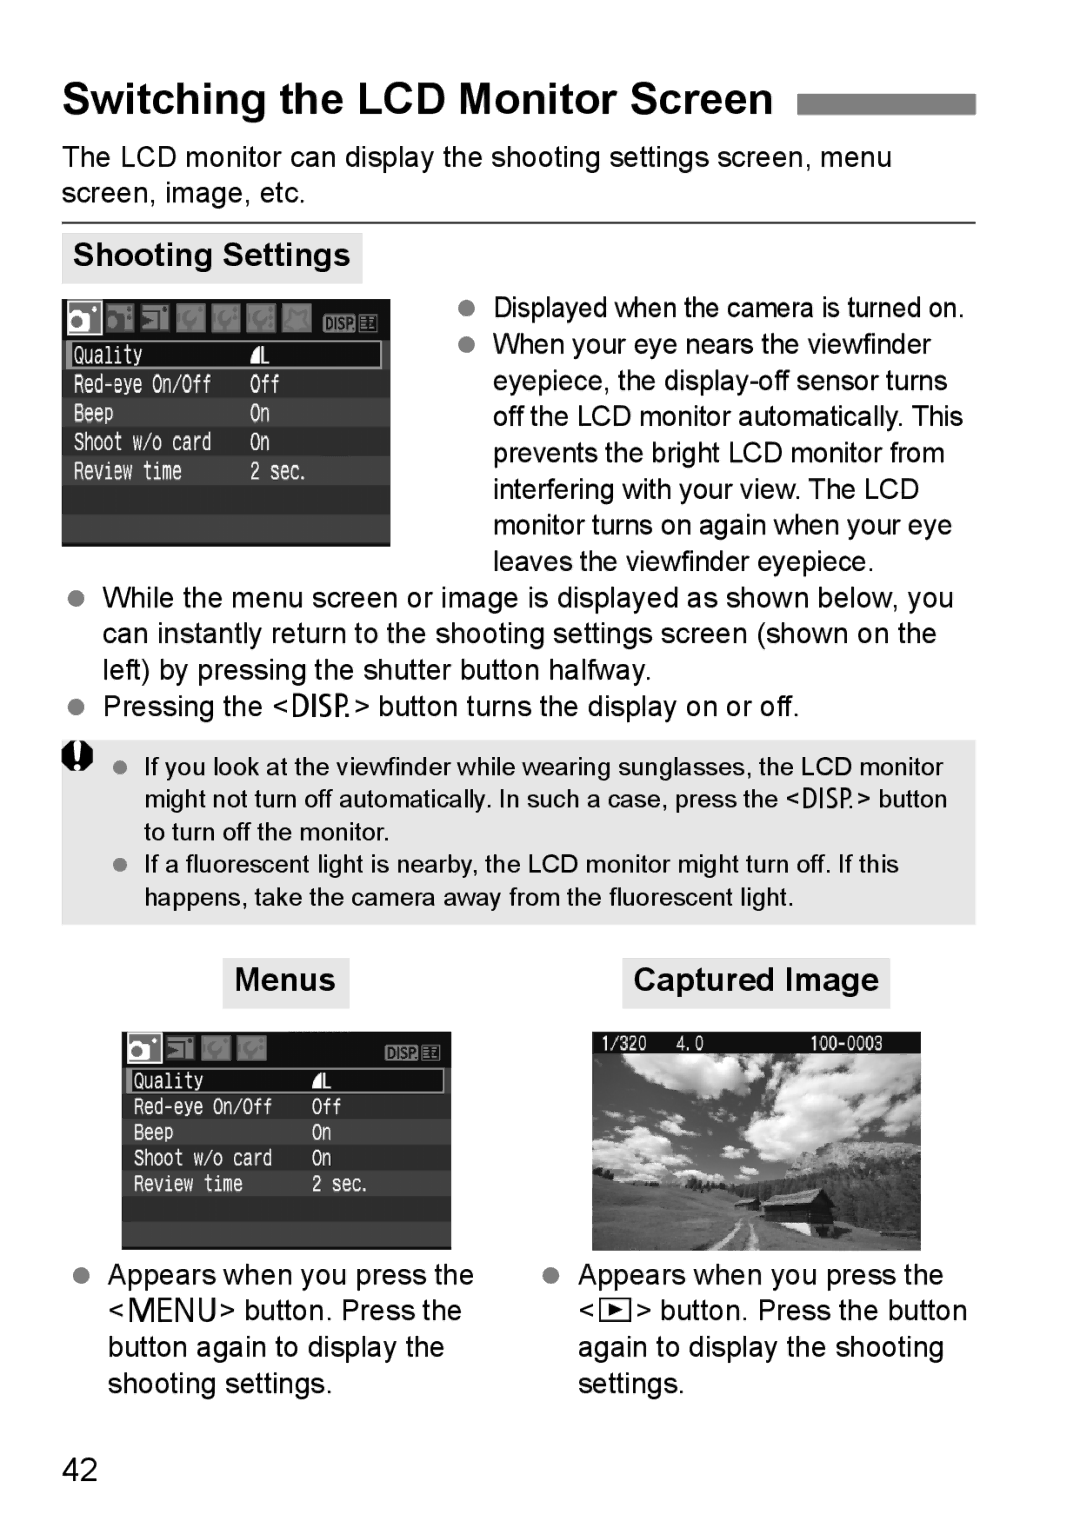 Canon EOS 450D instruction manual Switching the LCD Monitor Screen, Shooting Settings, Menus Captured Image 